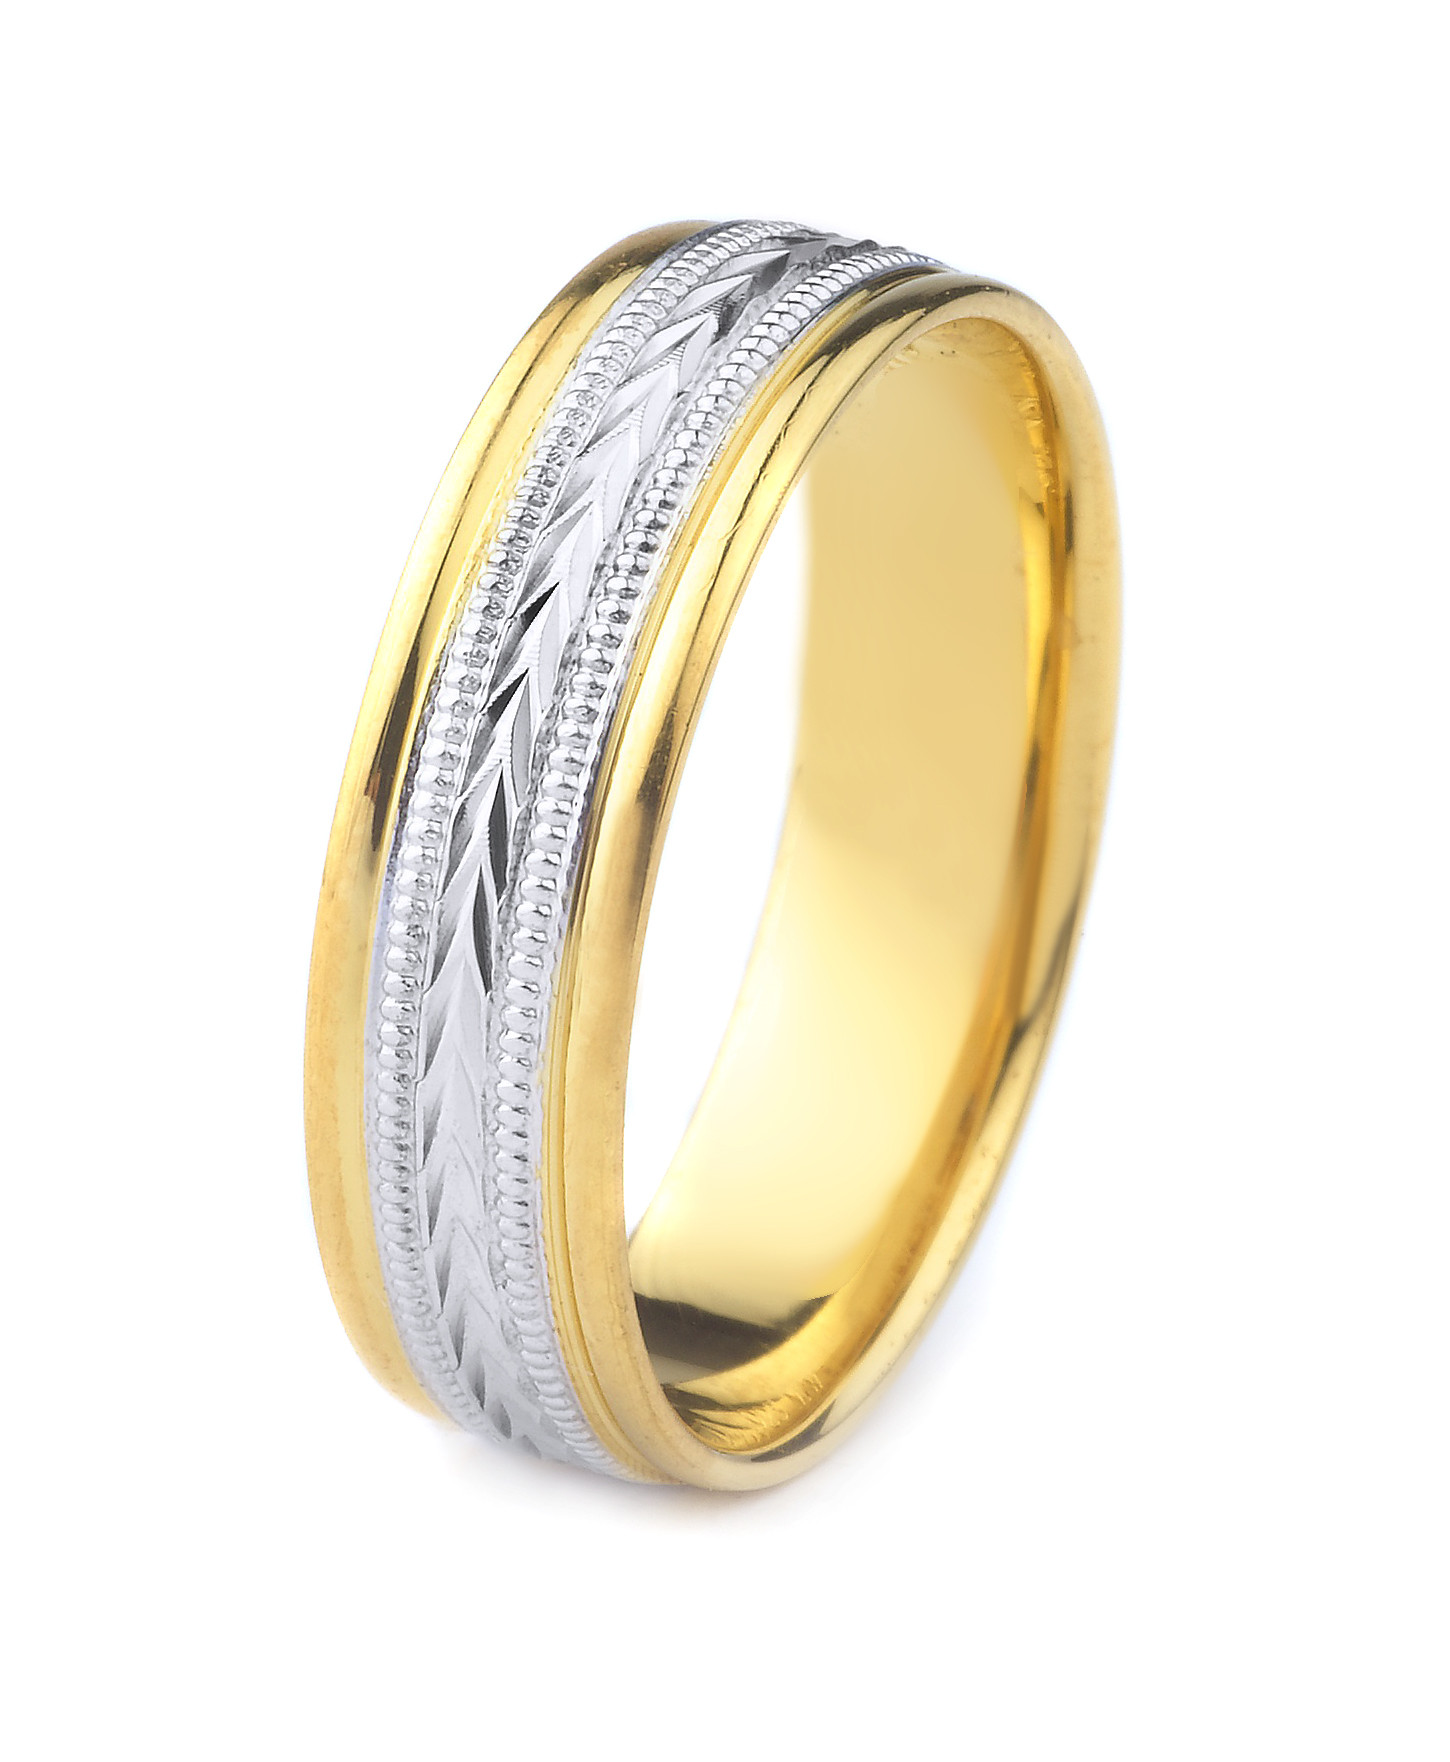 Two Toned Wedding Bands
 14k Gold Men s Two Tone Wedding Band with Wheat & Milgrain